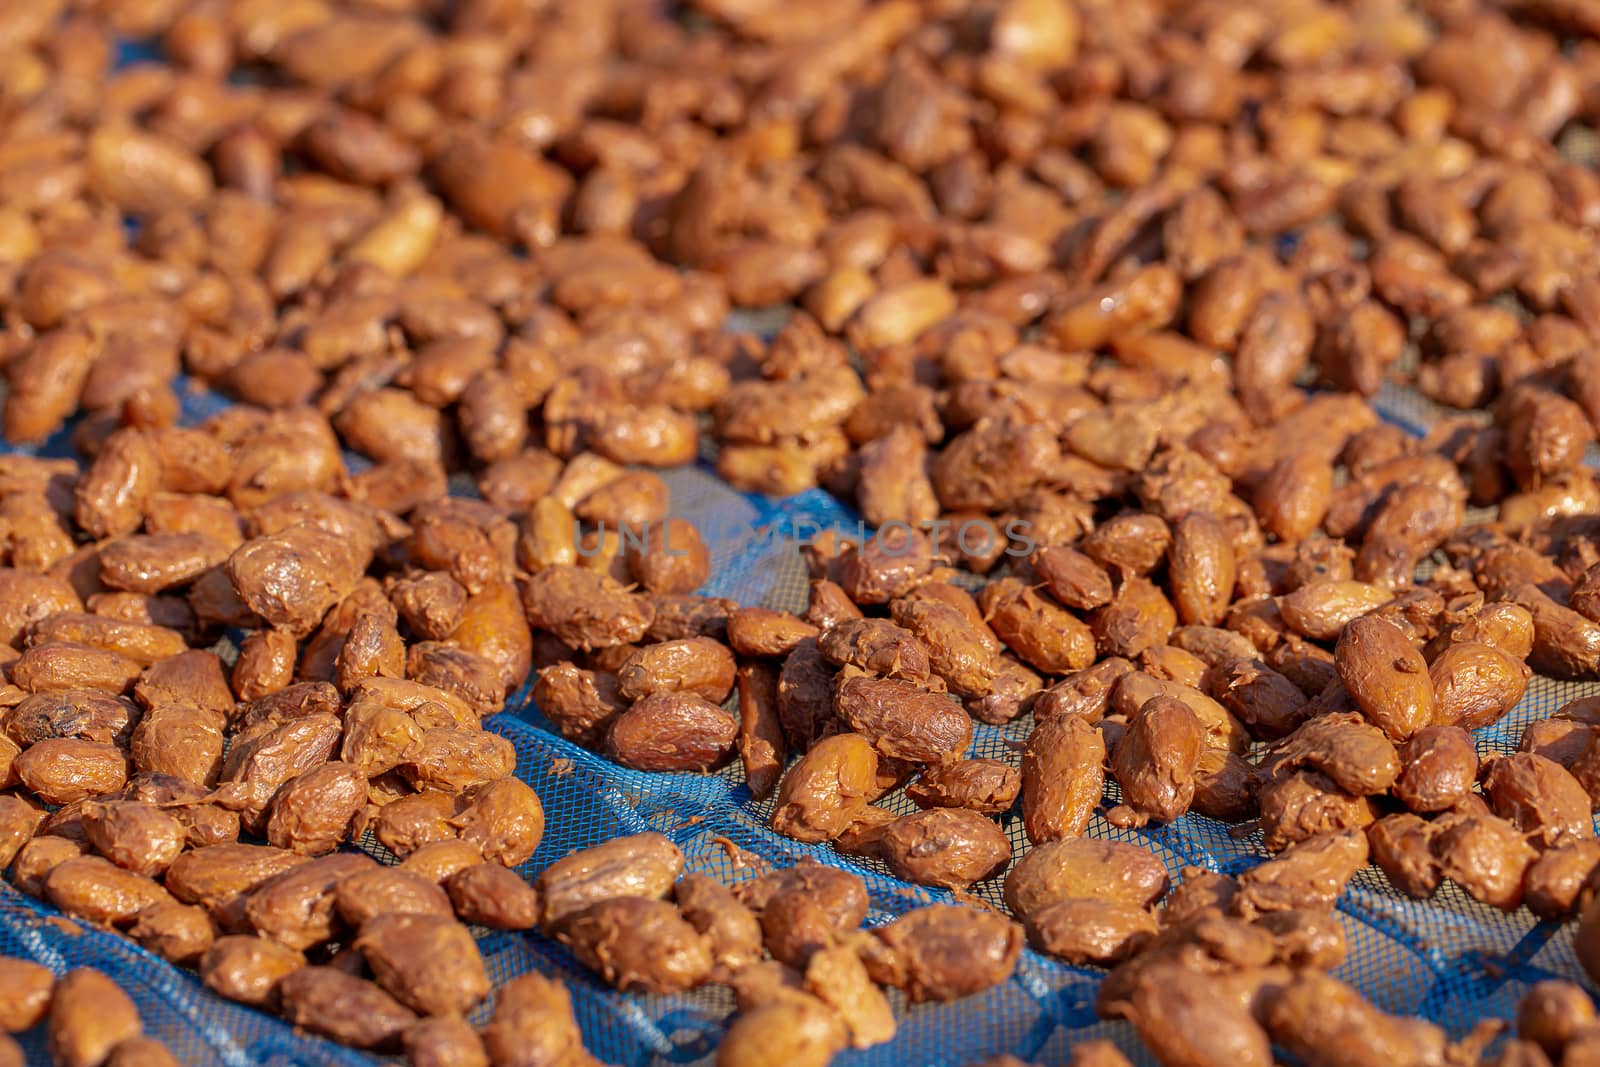 Drying raw Cocoa beans in the agricultural industry.